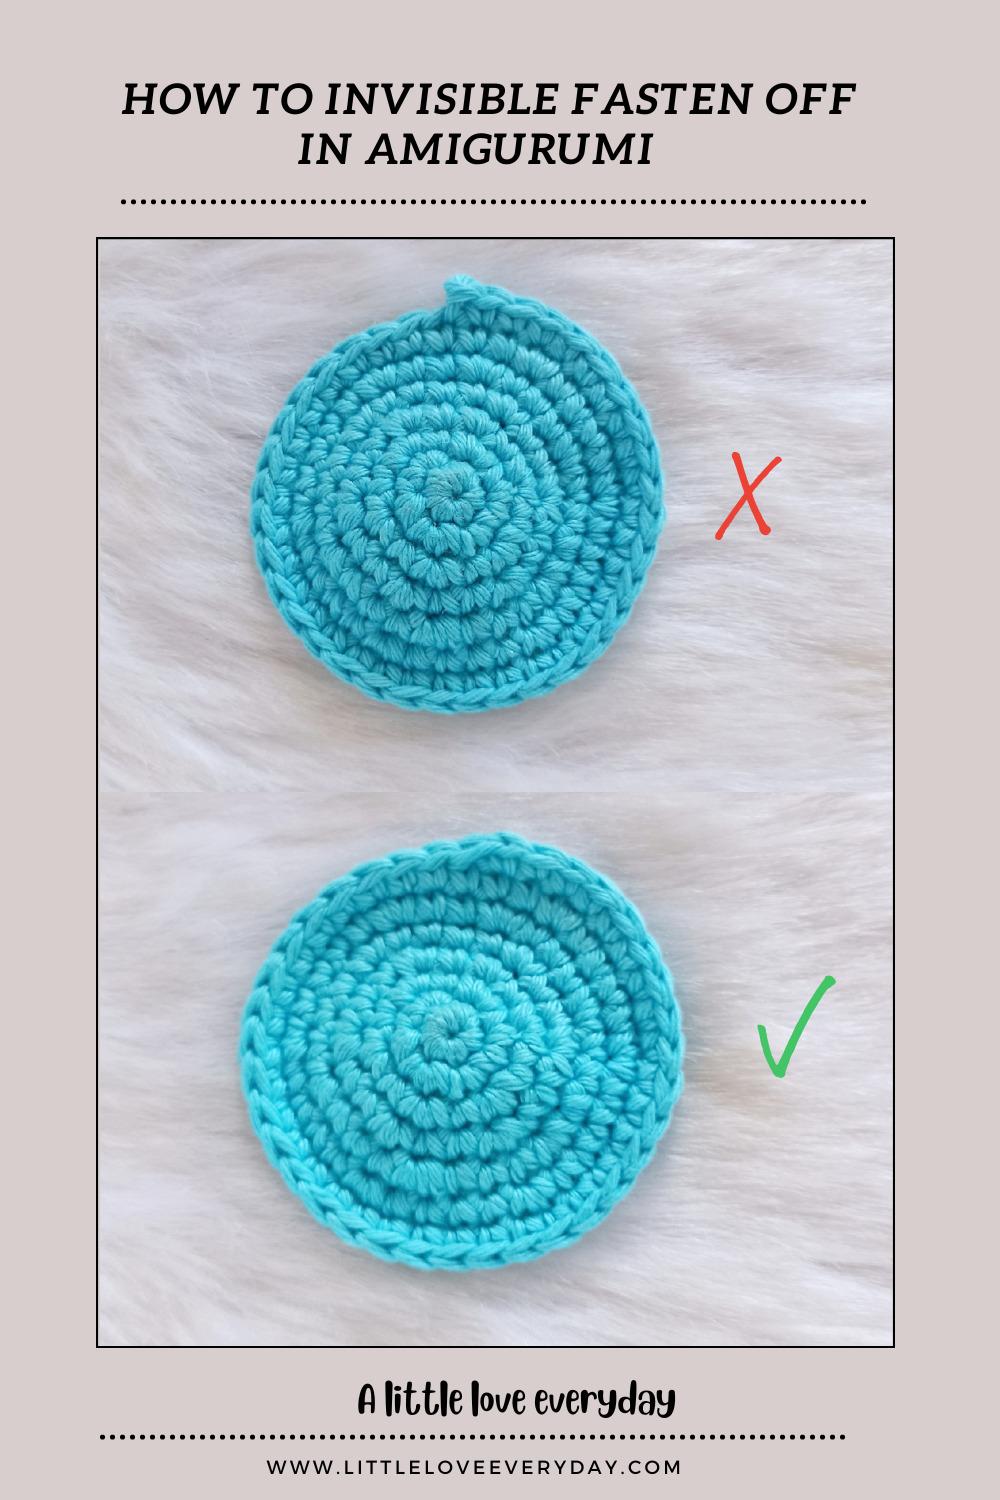 How to Invisible fasten off in amigurumi ⋆ A little love everyday